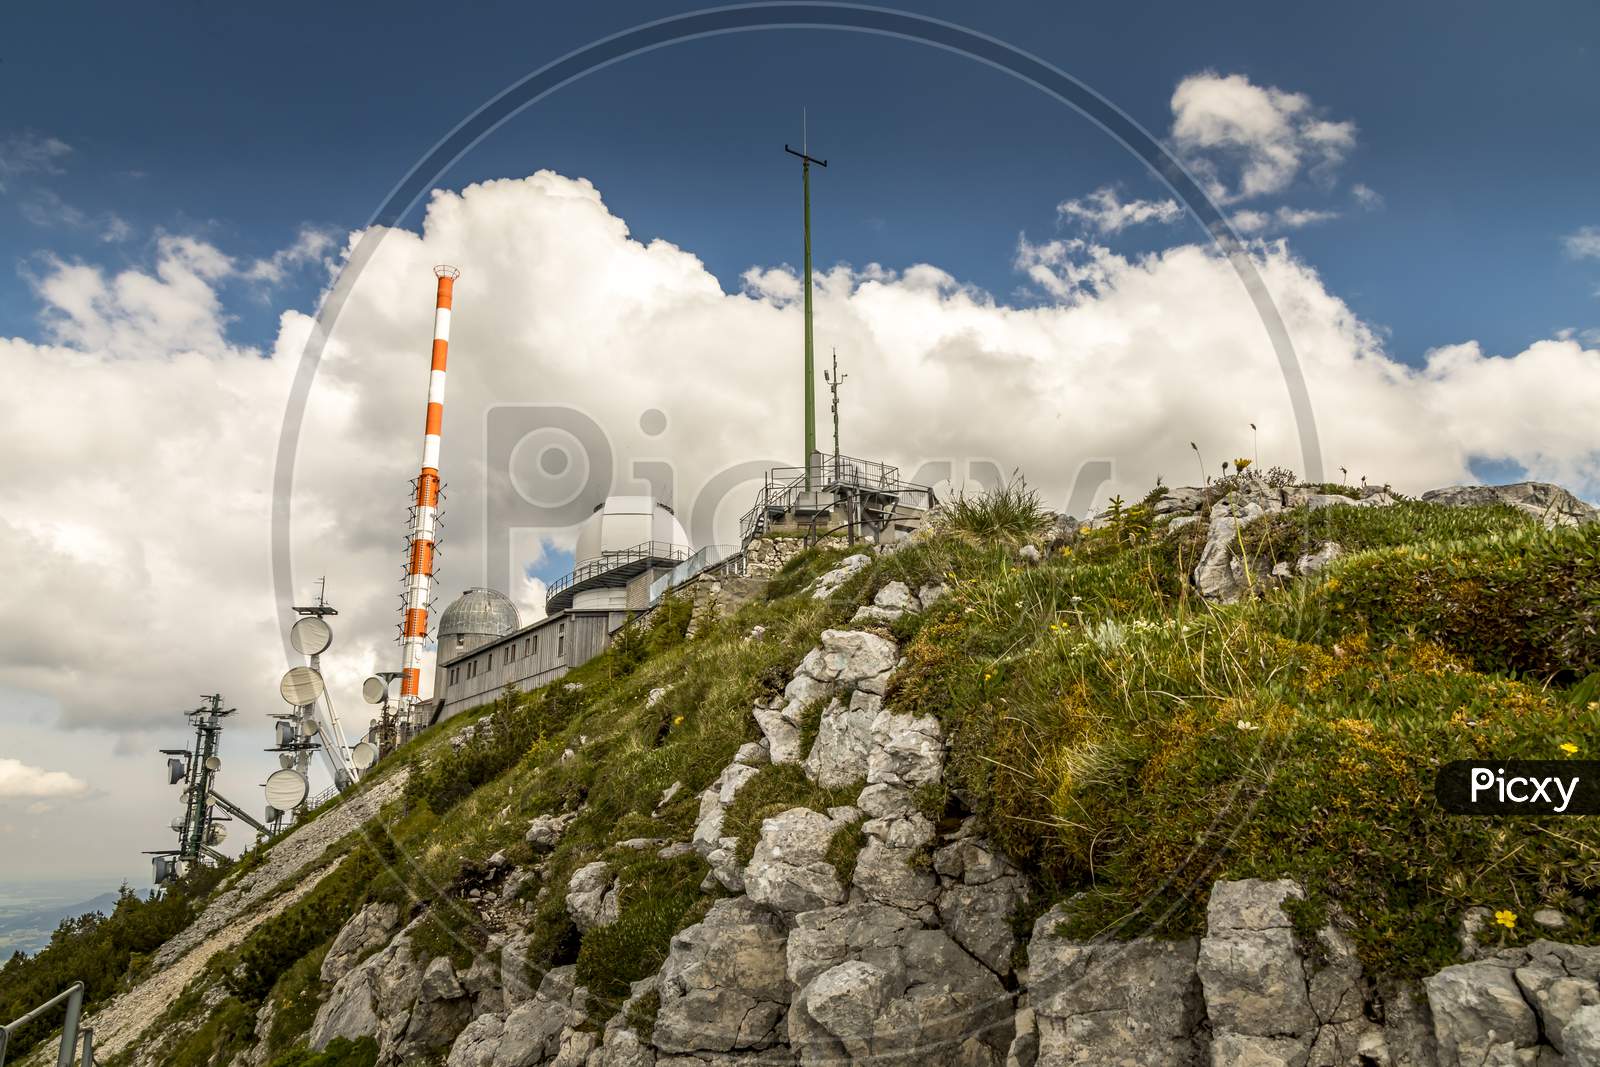 Wendelstein, Bavaria/Germany - July 17th 2020: A german photographer visiting the Wendelstein mountain via cable car, taking pictures of the weather station at the top of the mountain.